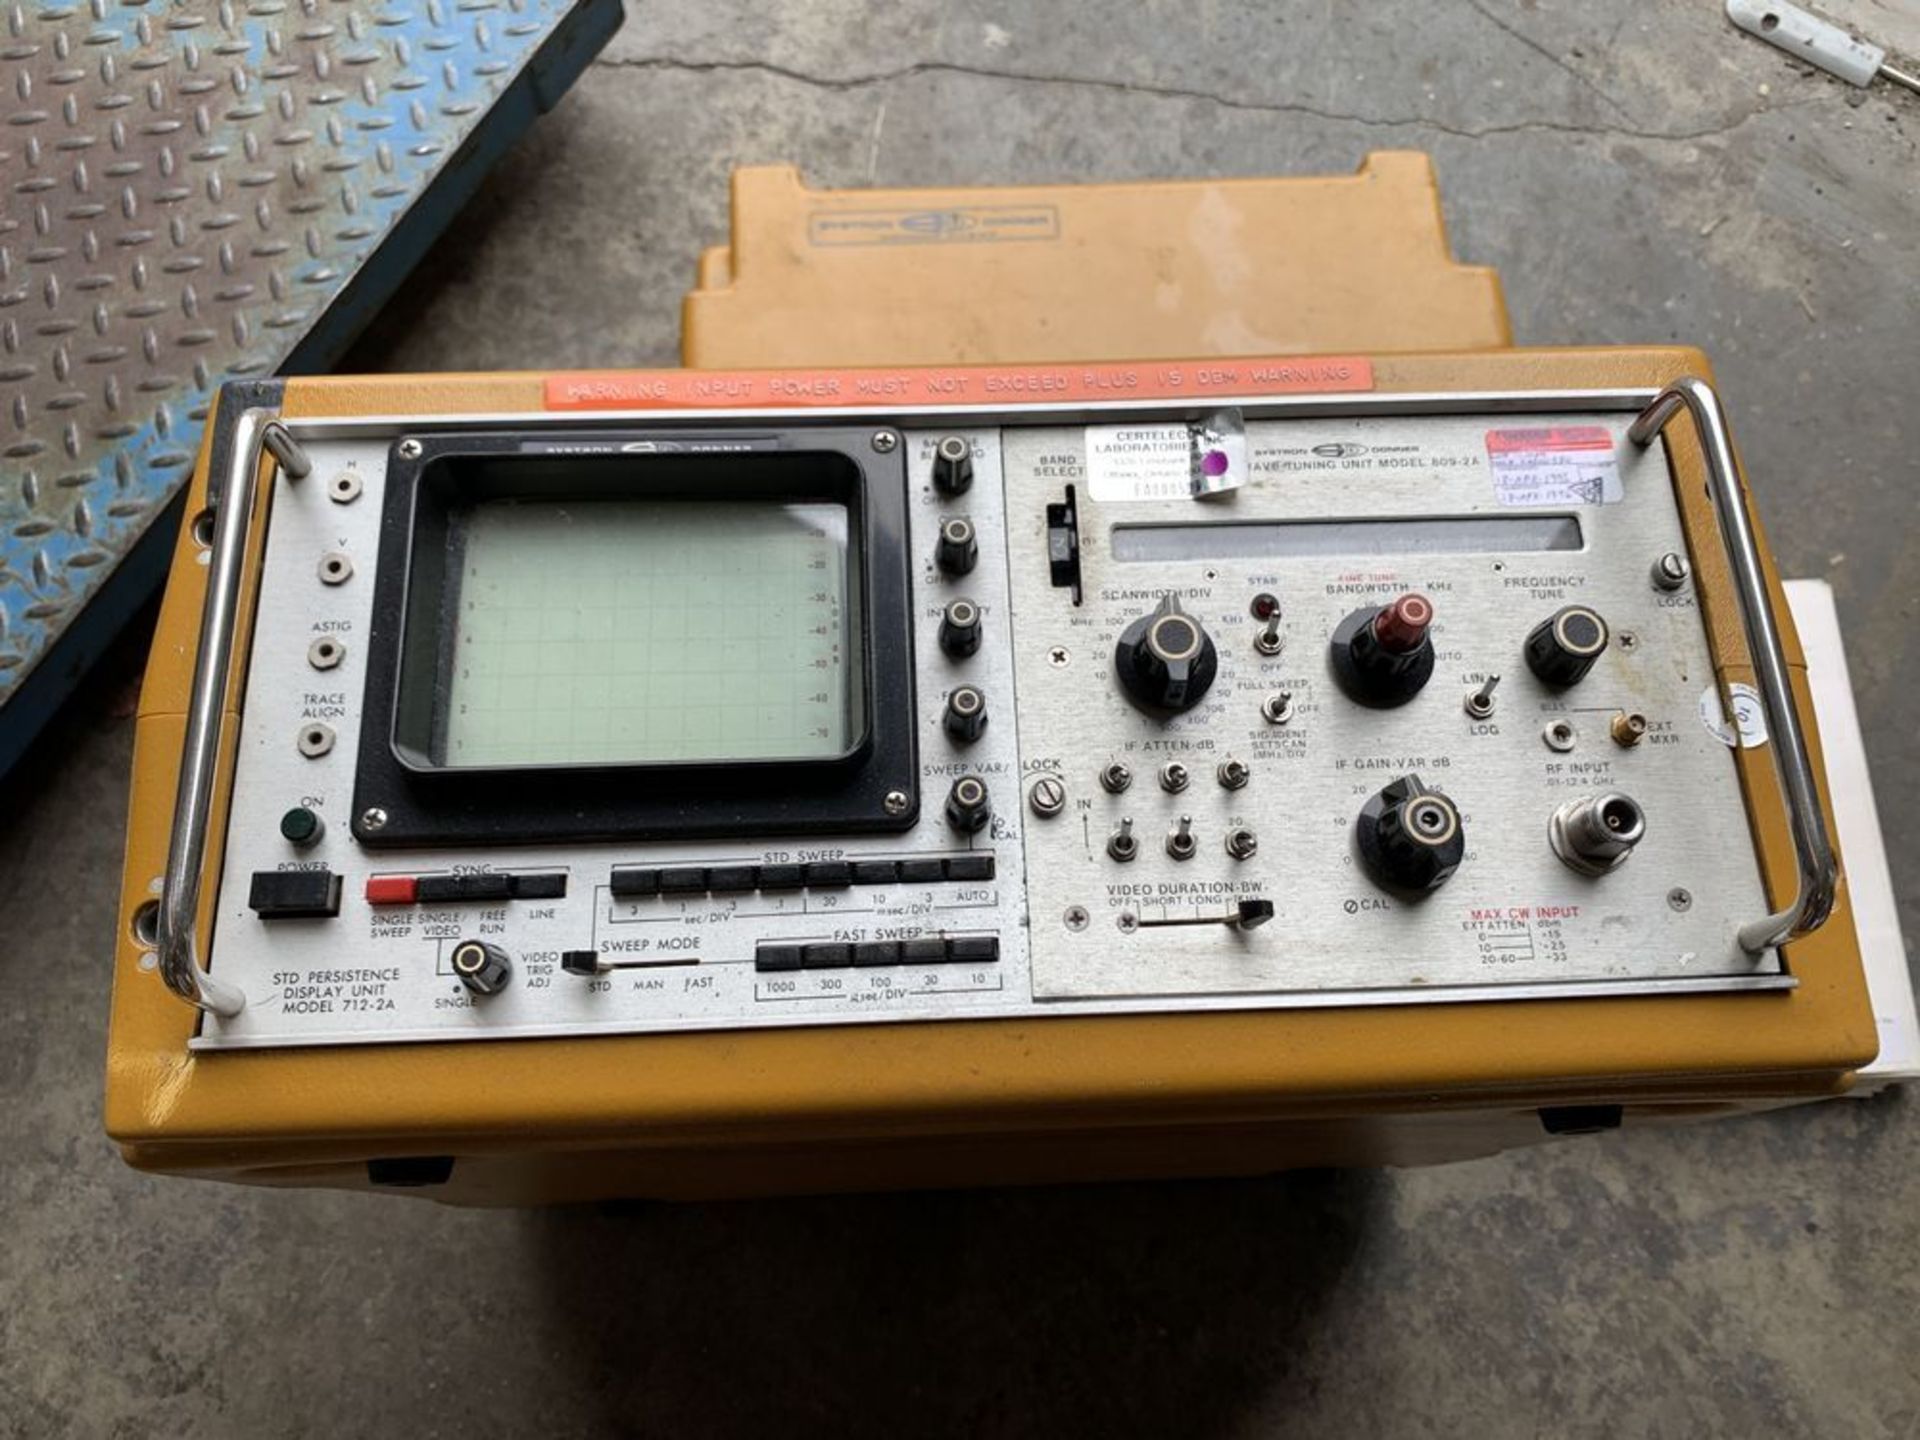 Systron Donner Microwave Tuning Unit Model 809-2A, Ship from or pick up in Los Angeles - Image 2 of 8